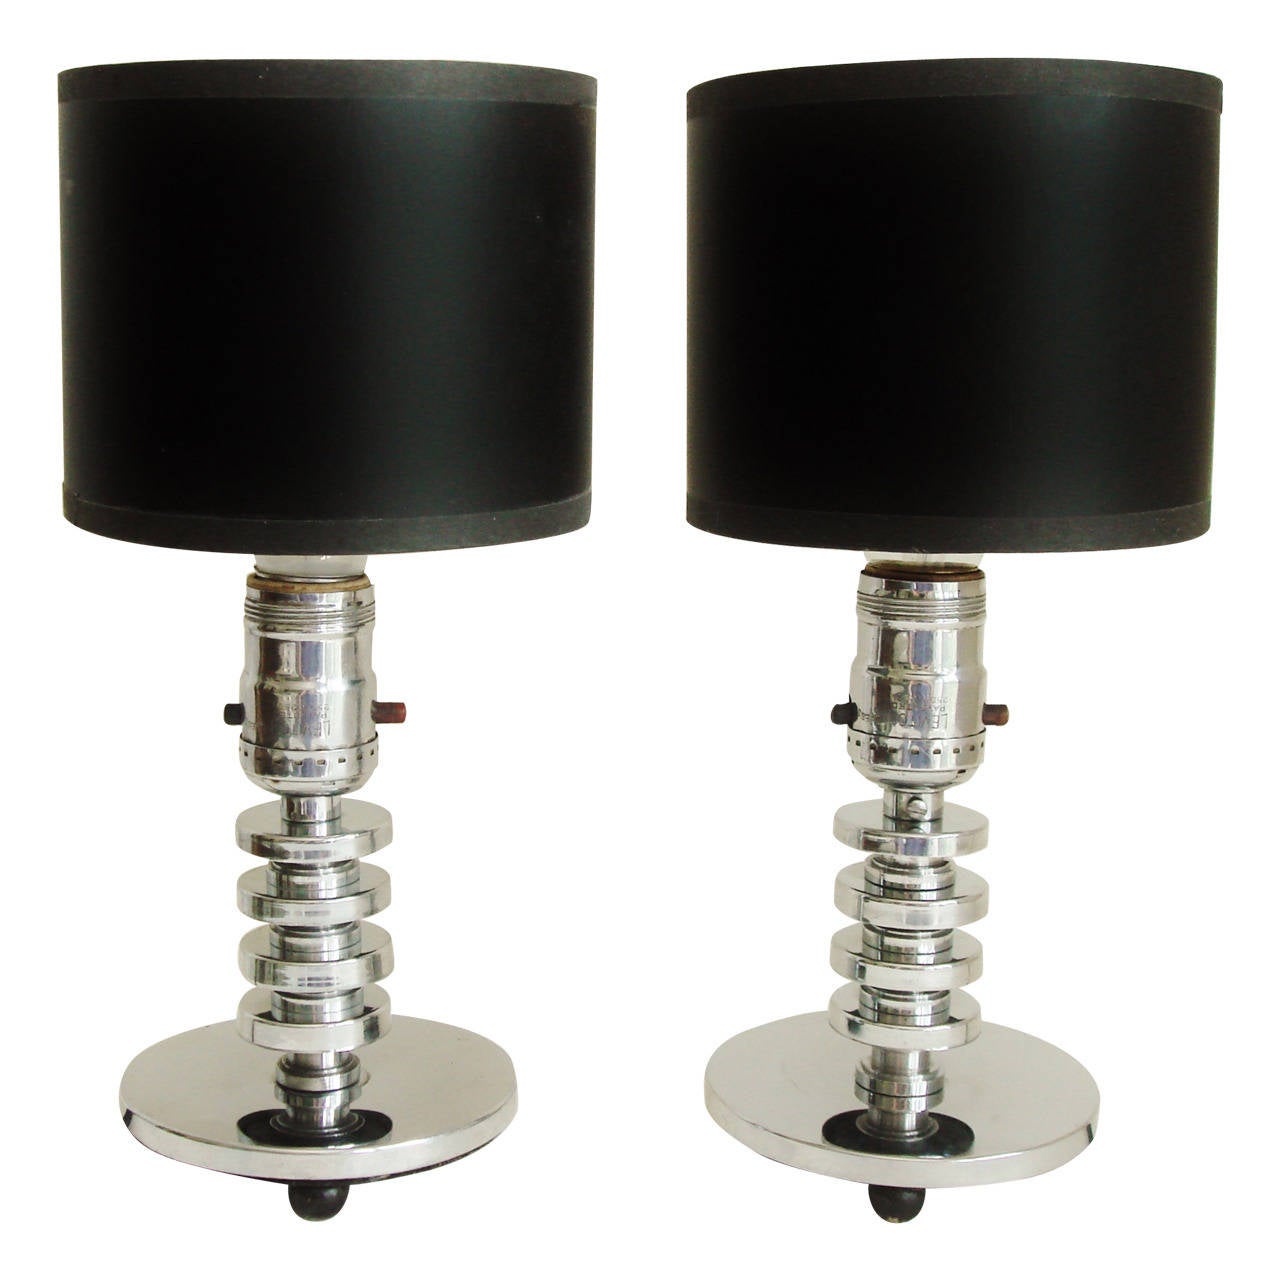 Pair of Small American Art Deco/Machine Age Chrome and Wood Table/Boudoir Lamps